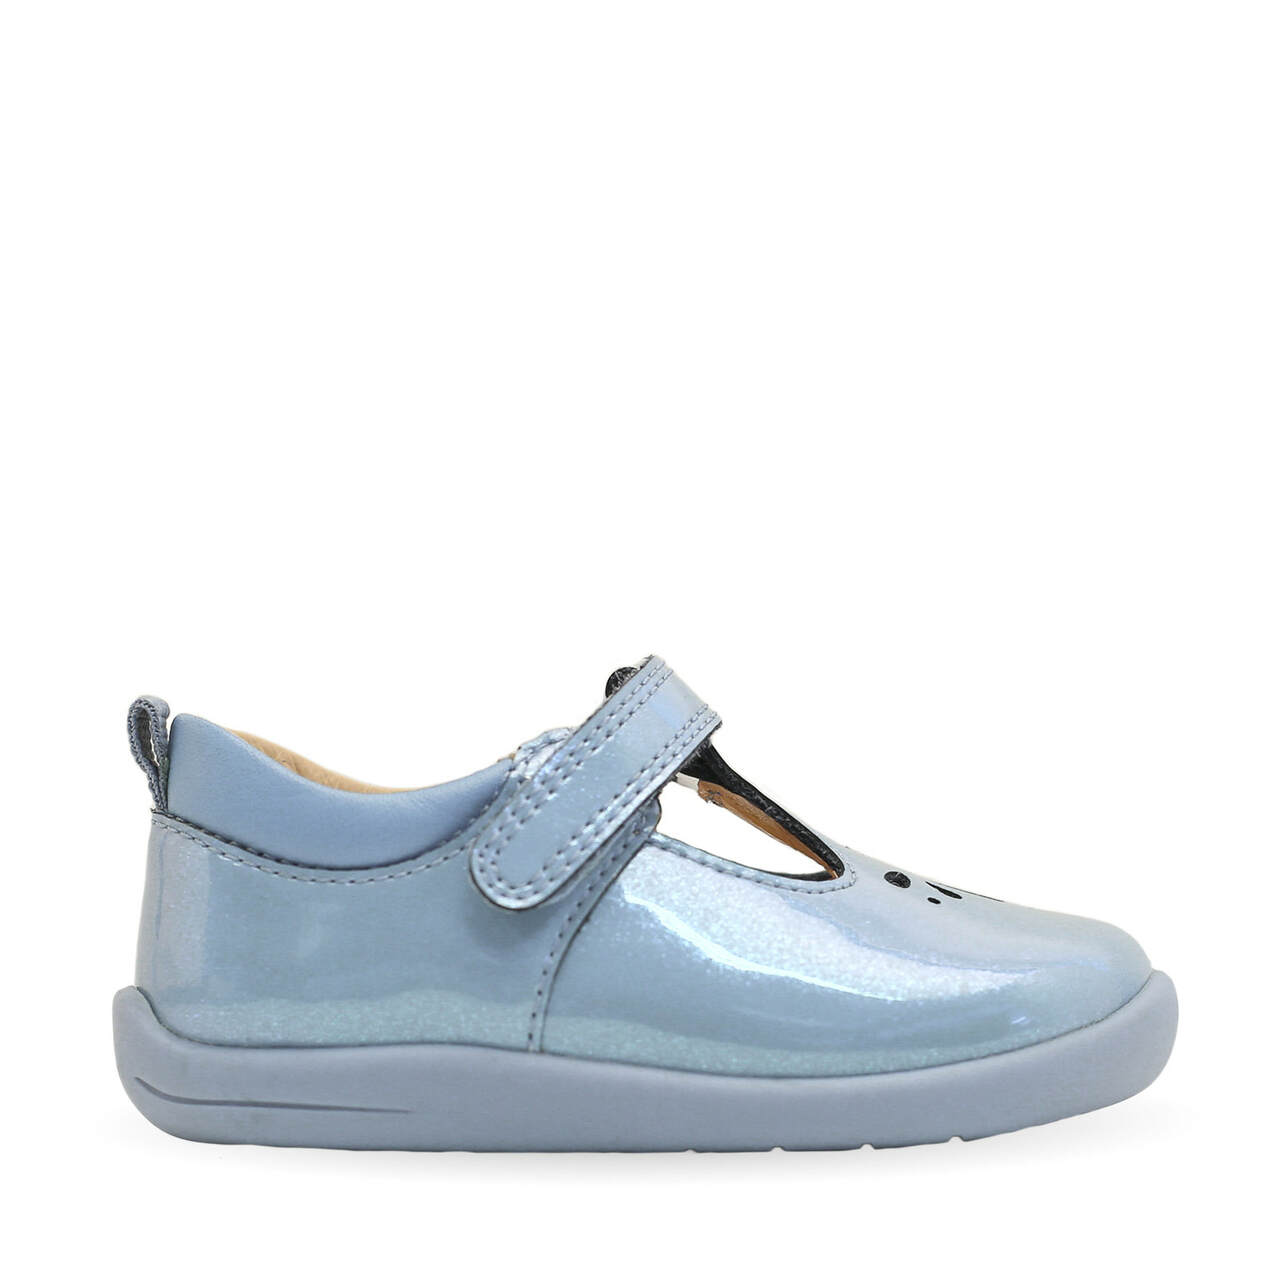 A girls T Bar shoe by Start Rite,style Puzzle, in blue with velcro fastening. Right side view.